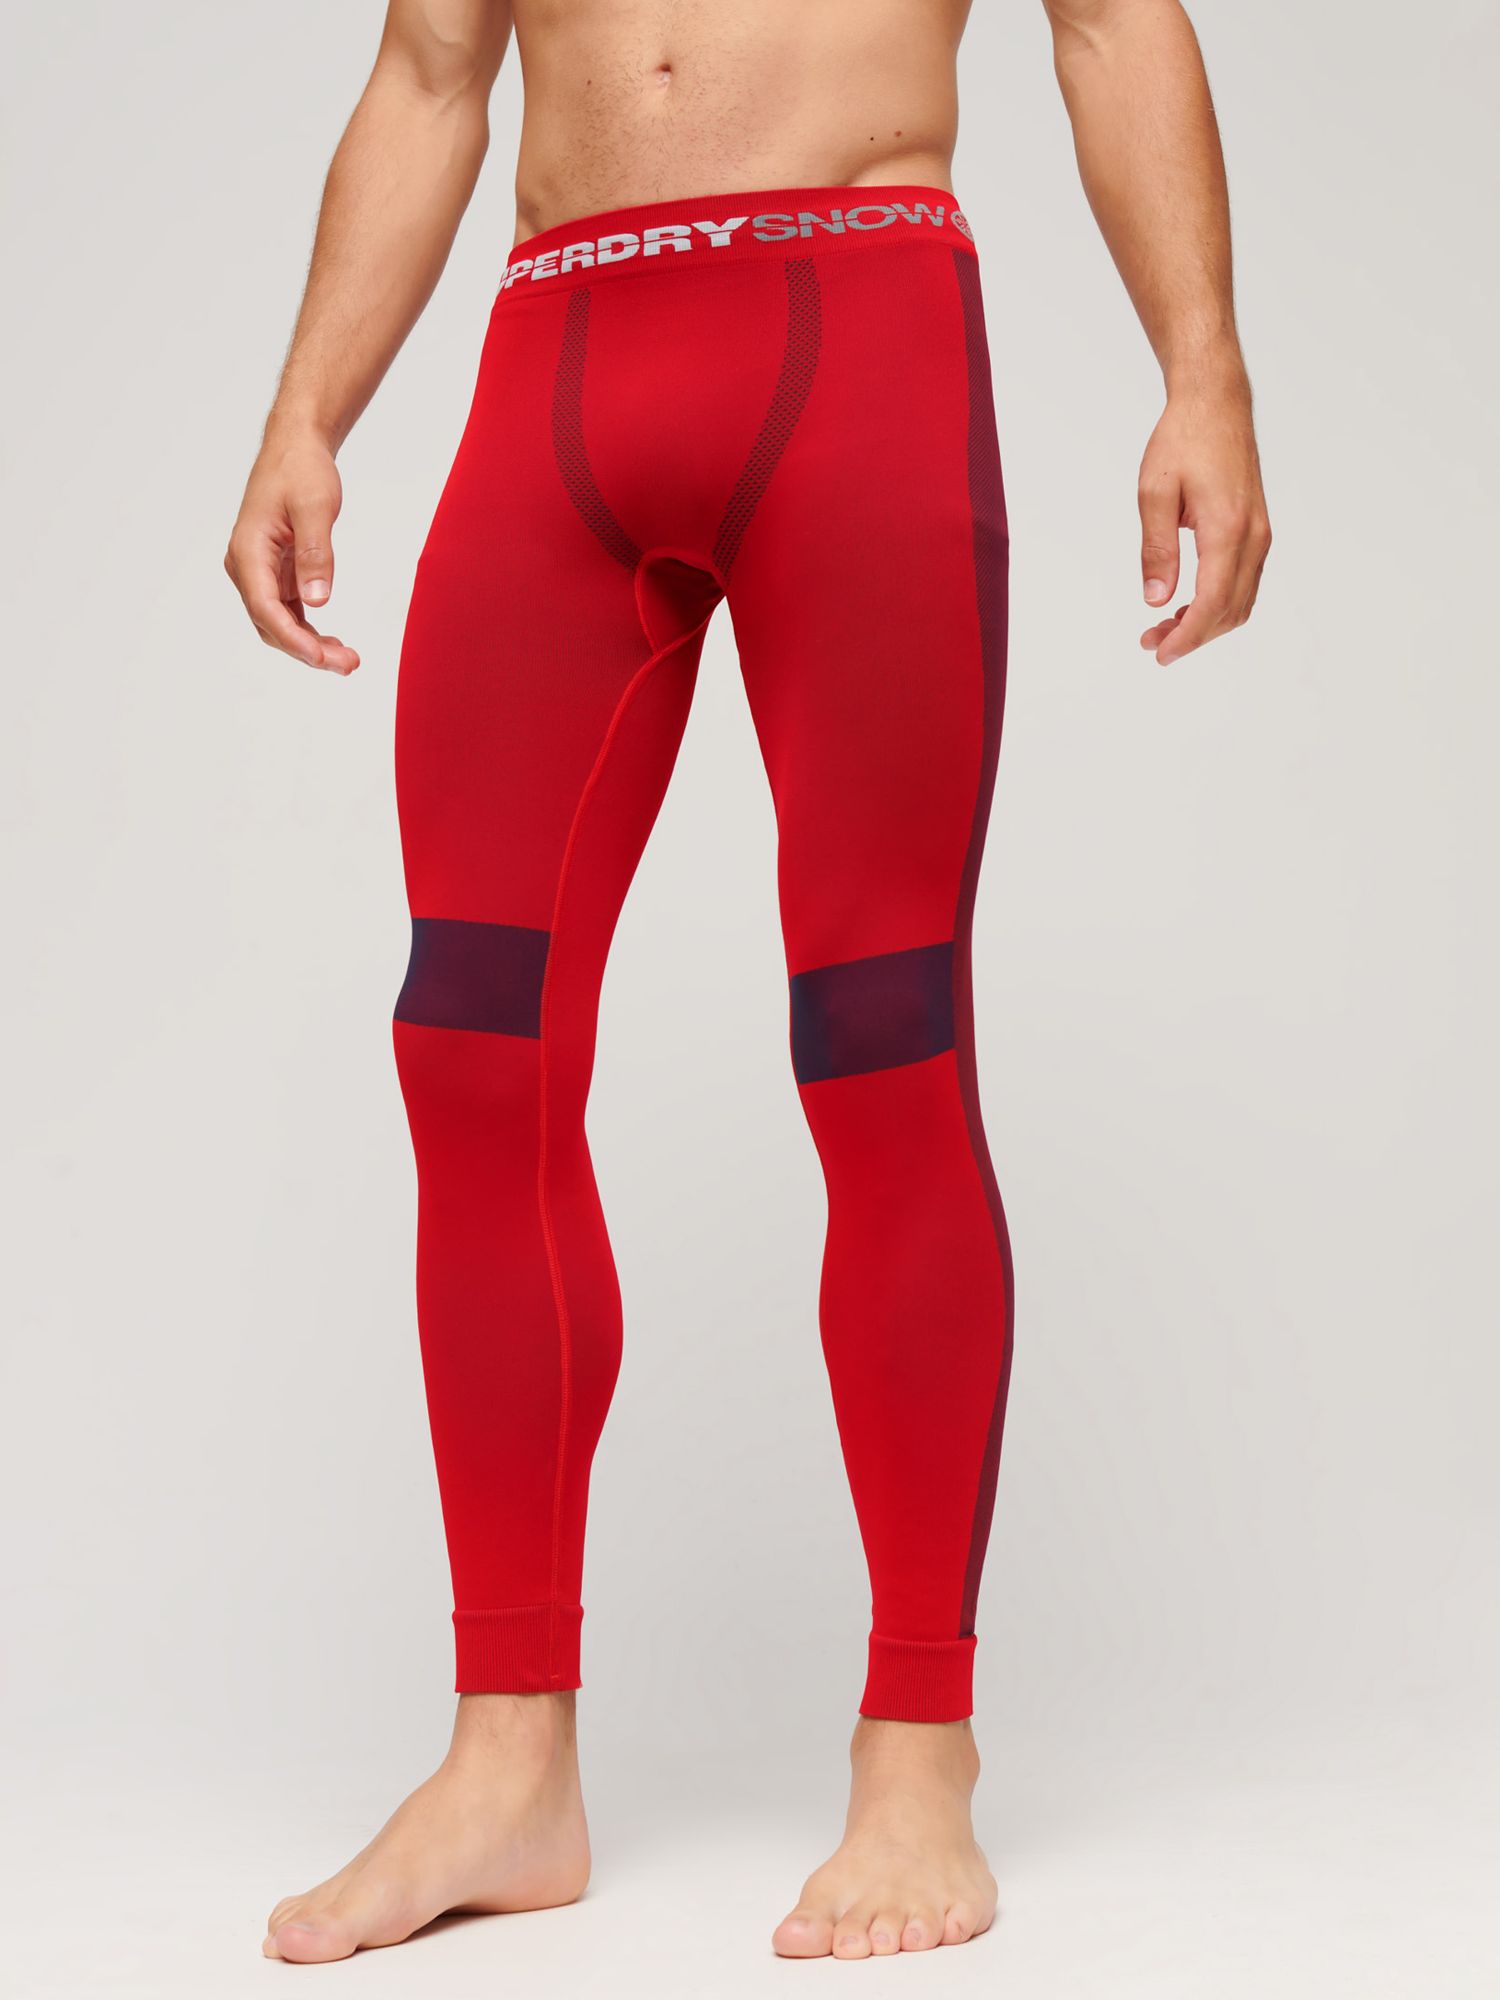 Superdry Seamless Base Layer Leggings, Hike Red, XXL